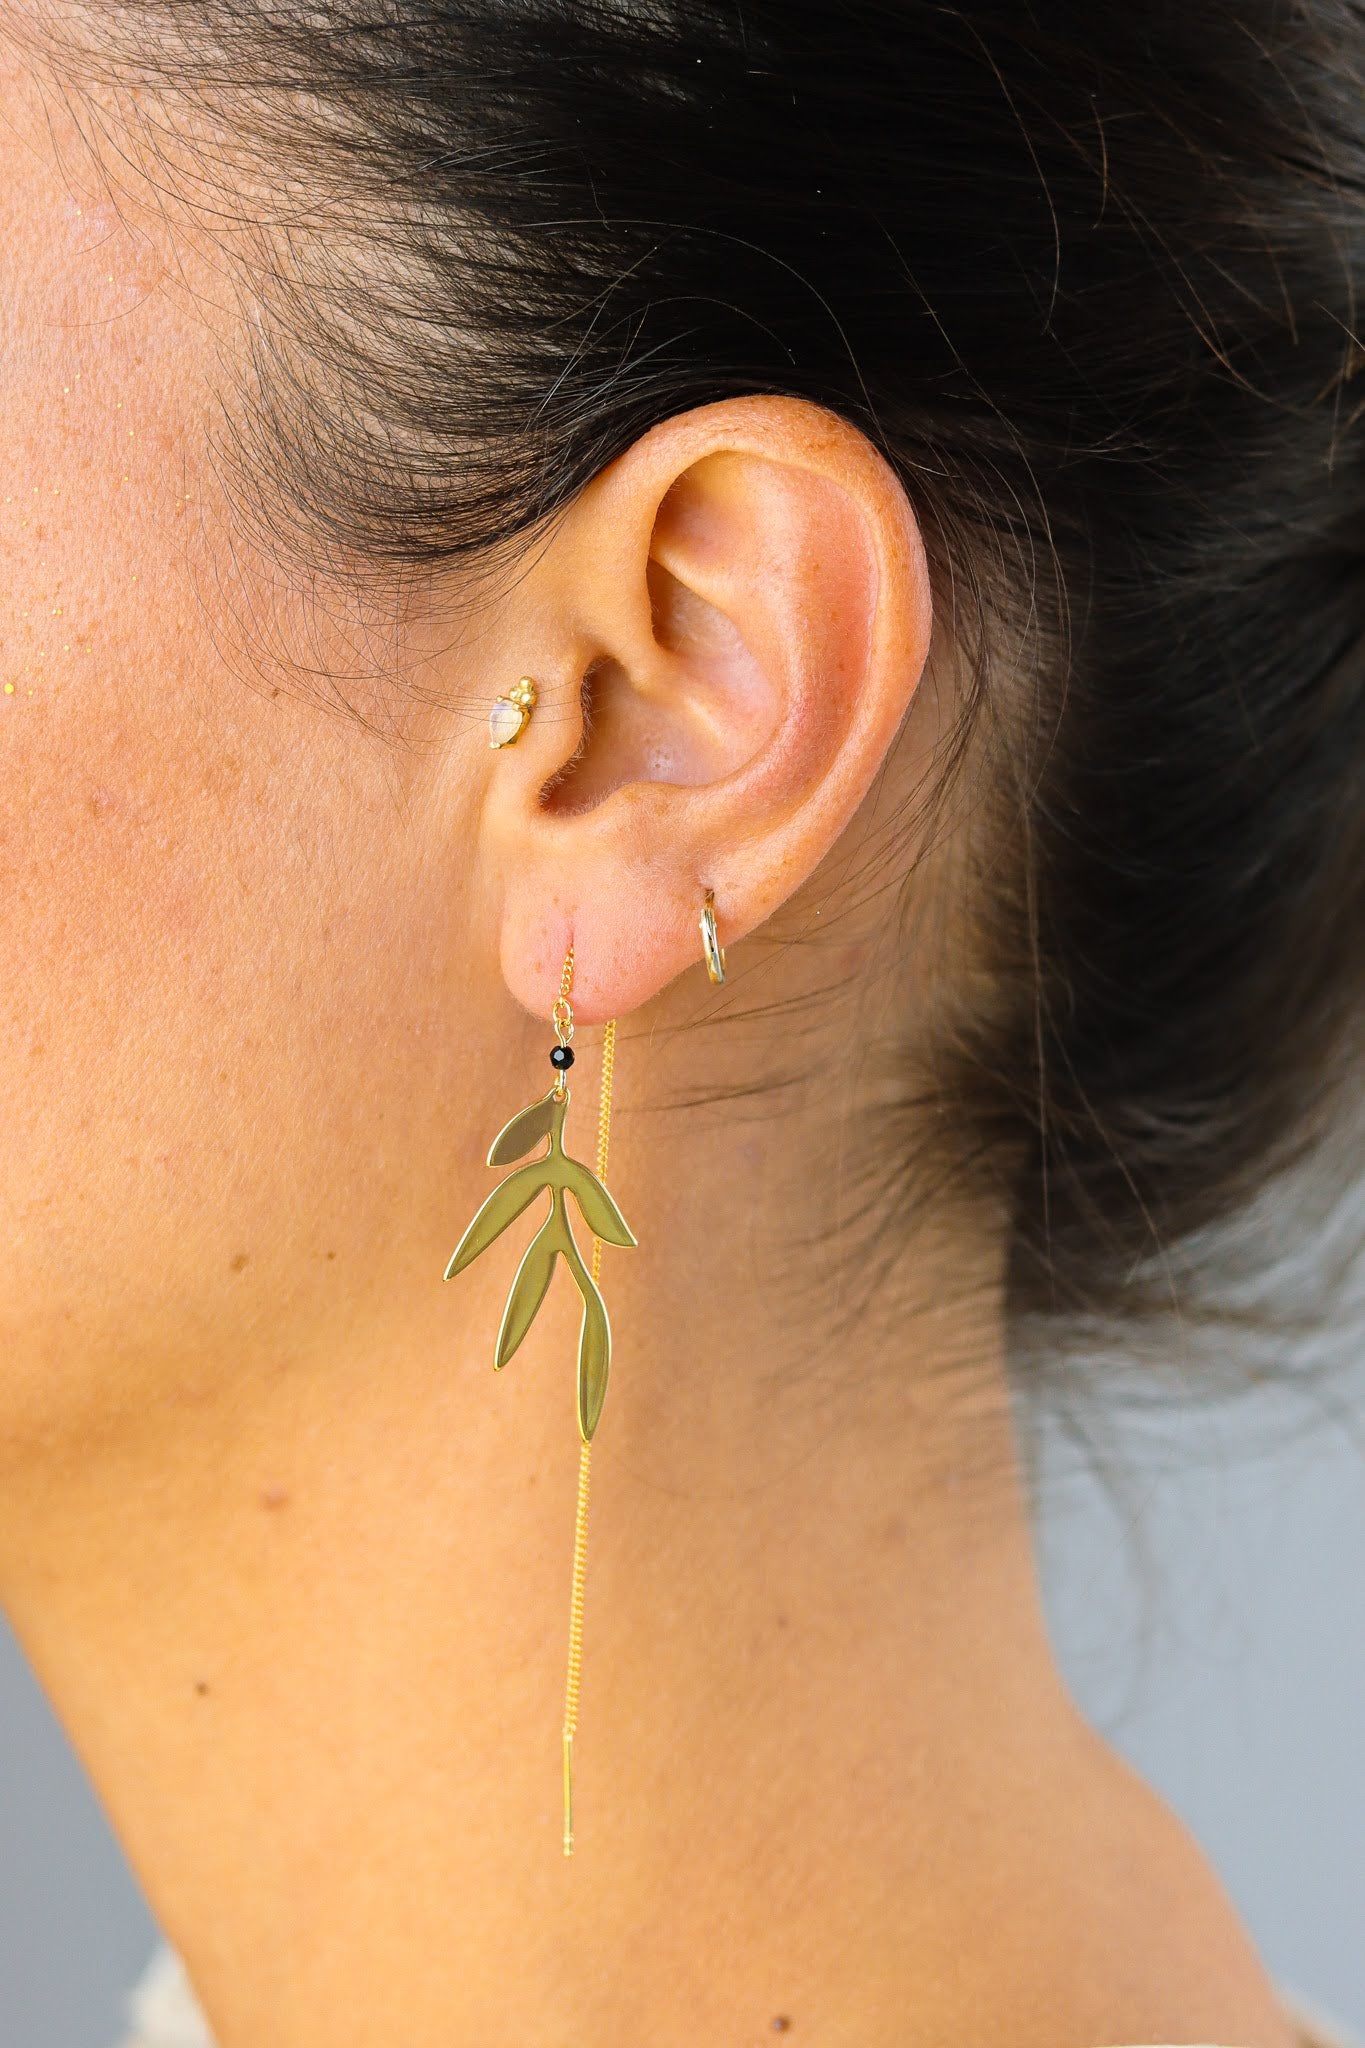 Stay Gold by Mme bovary Dangling golden poetic leaf threader earrings